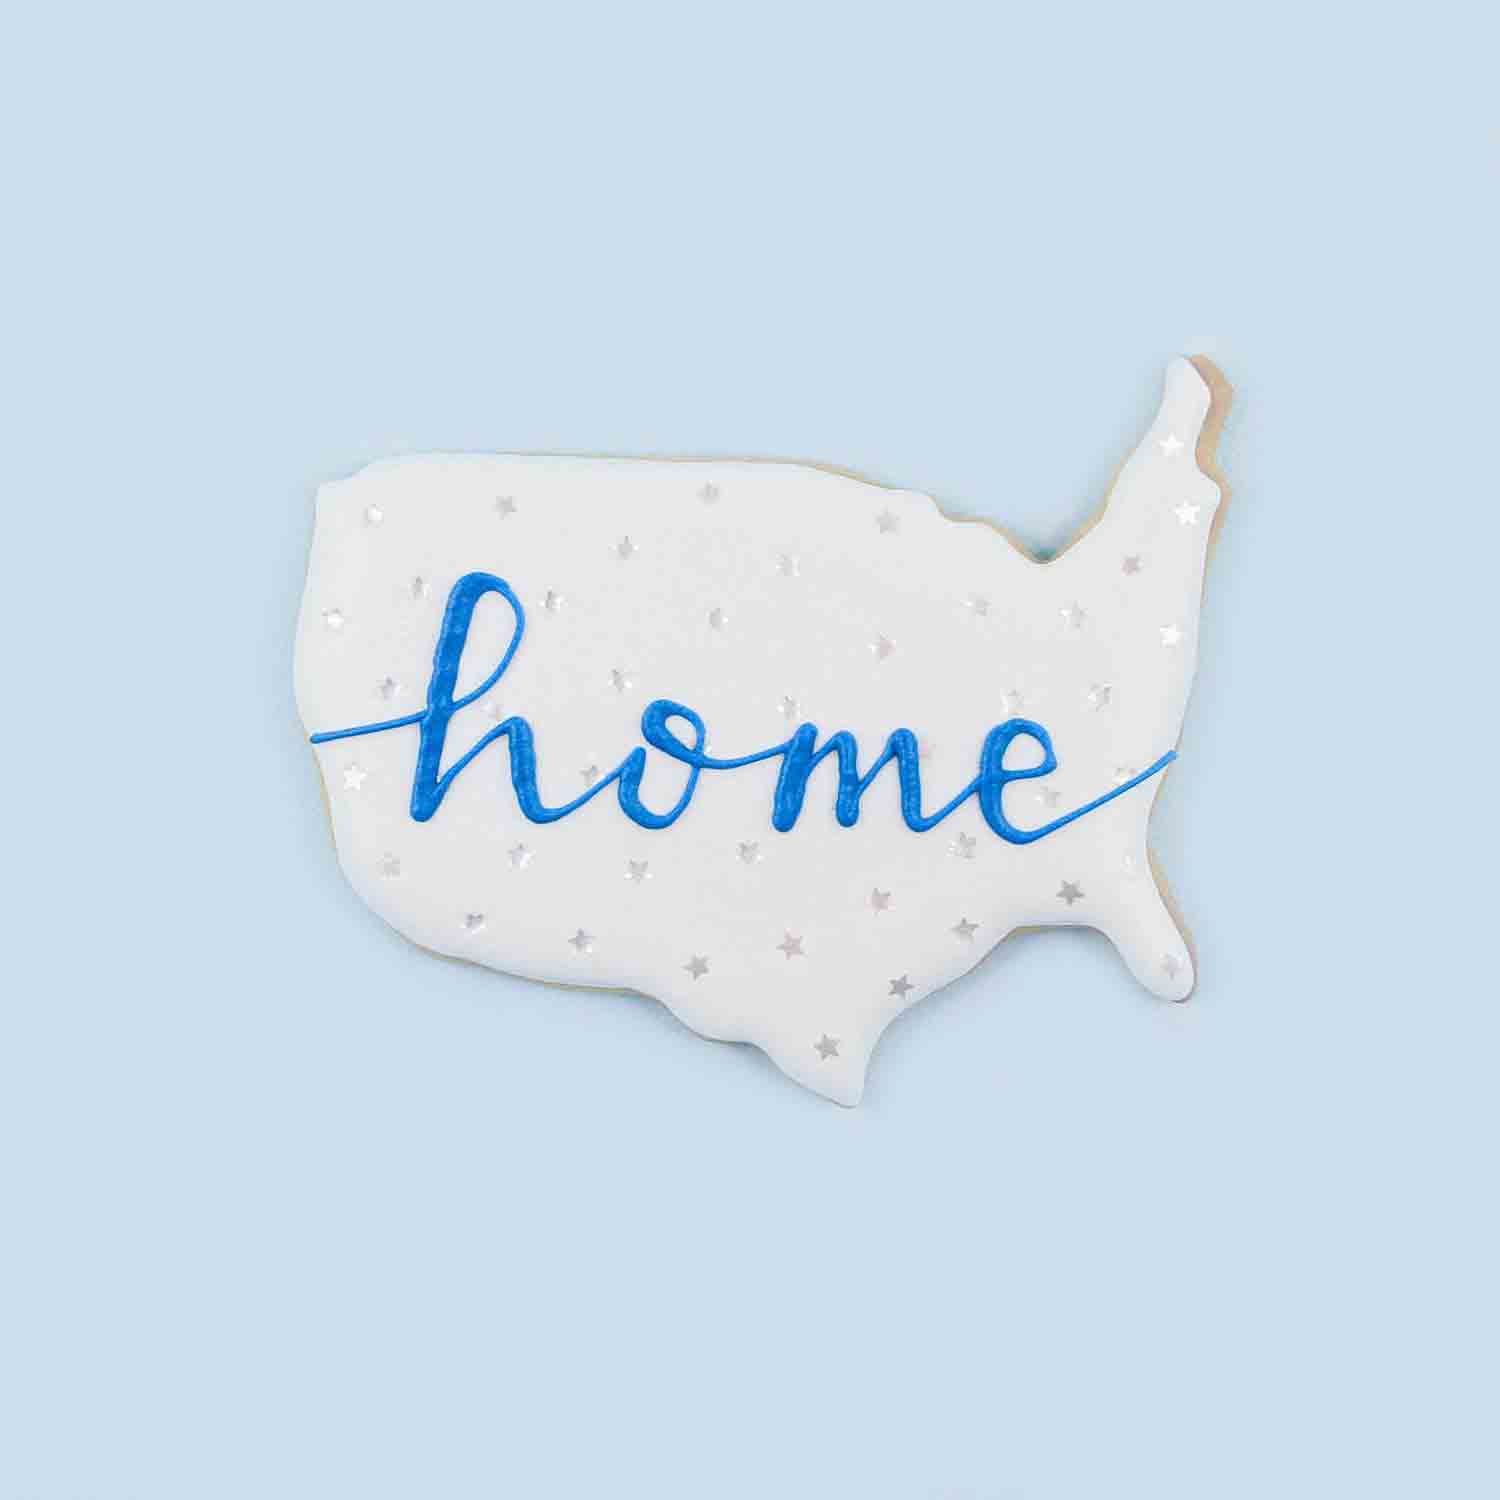 Chubby USA Map Cookie Cutter